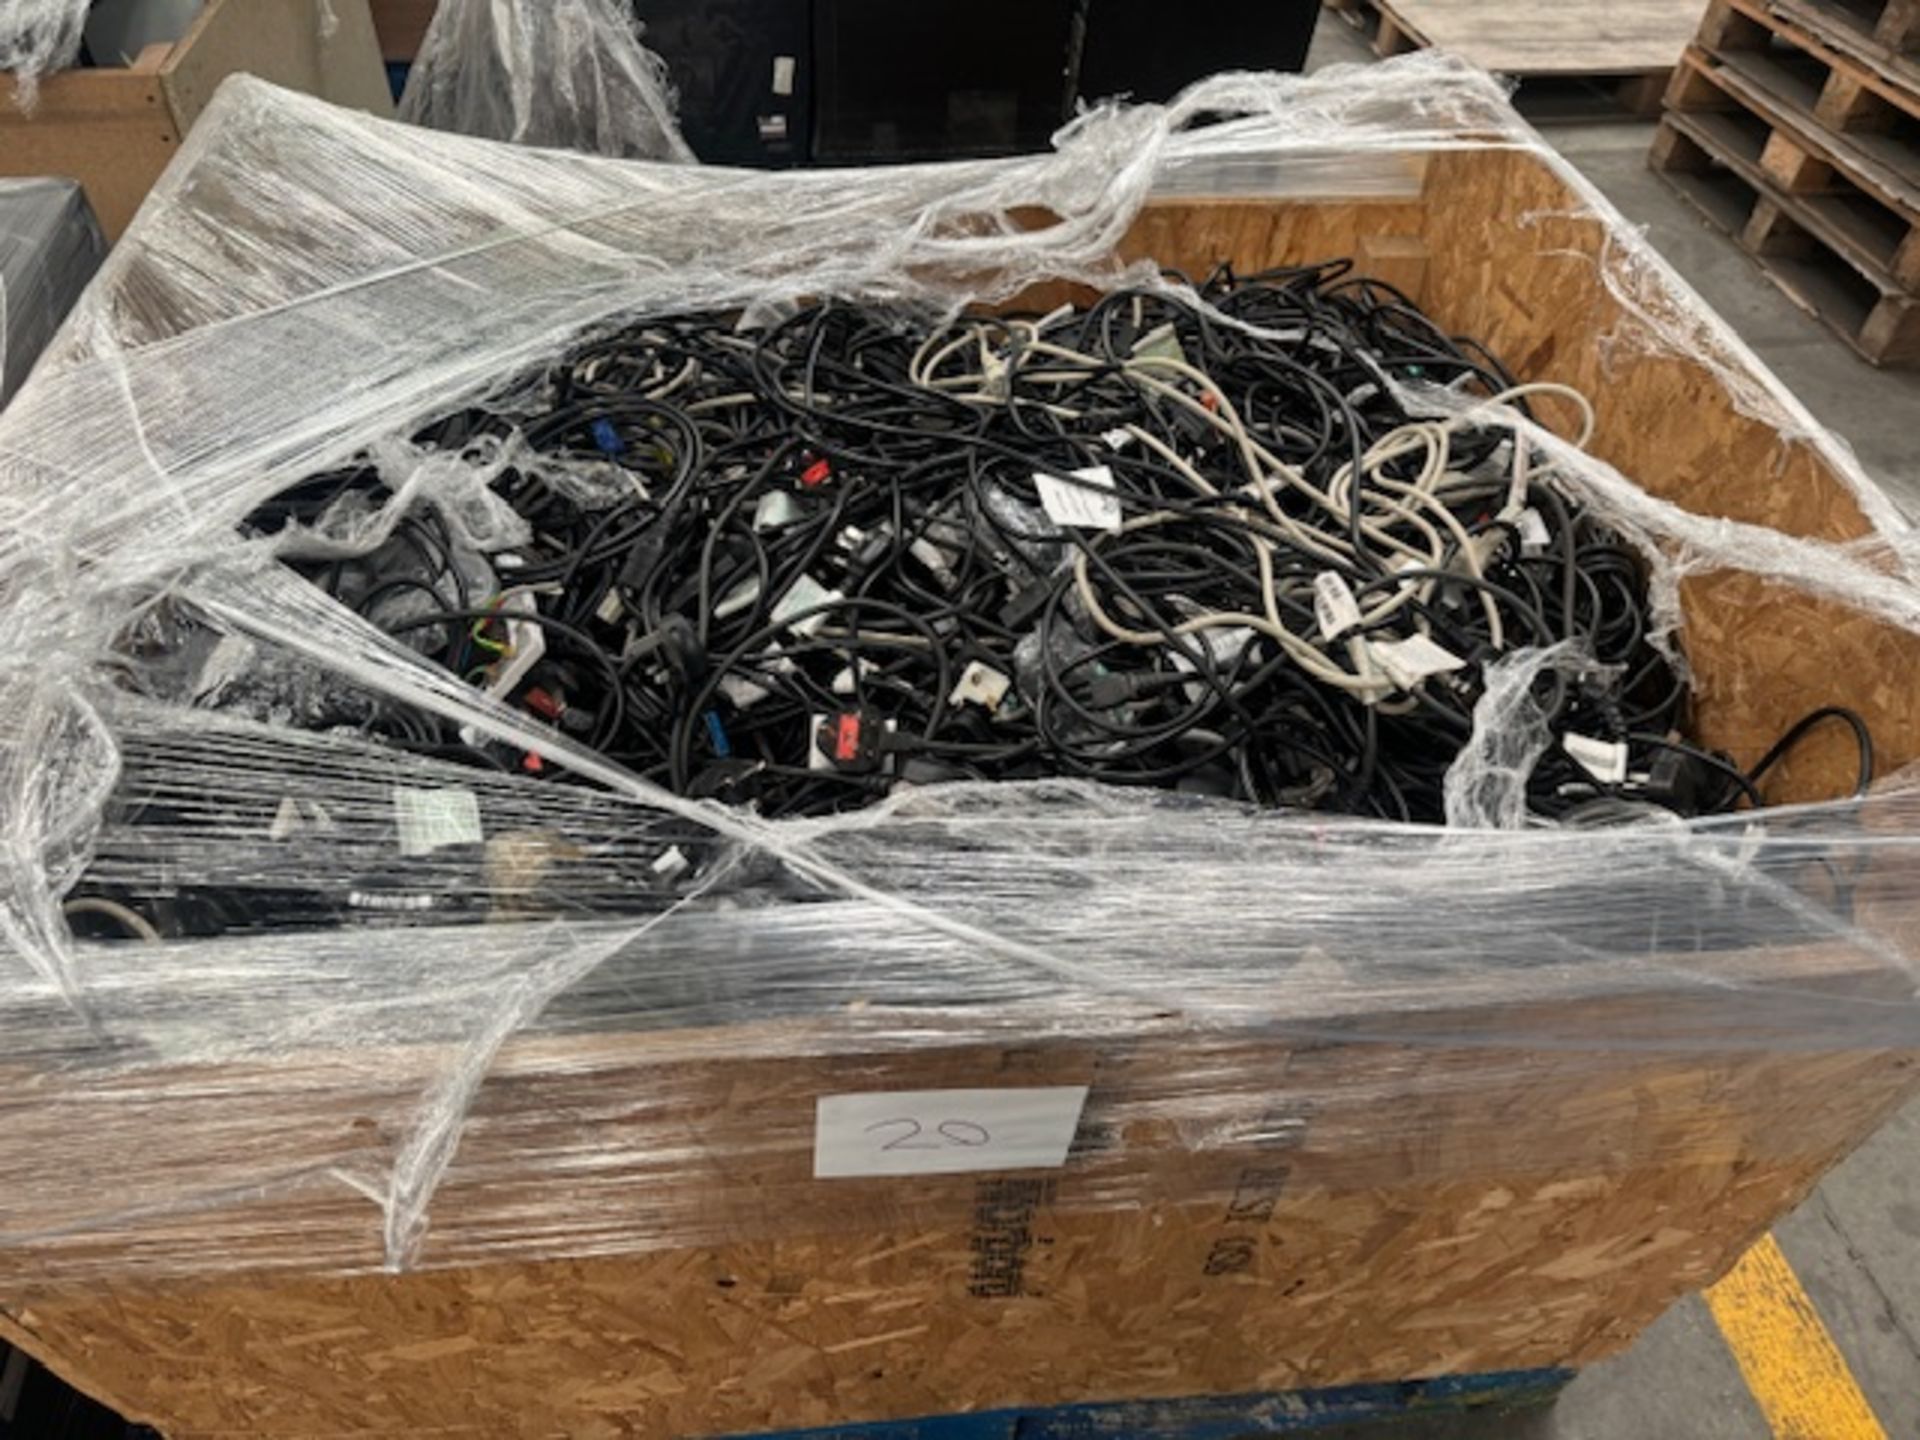 IT PALLET LOT INCLUDING A VERY LARGE VOLUME OF SPARE LAPTOP/PC POWER CABLES IN VARIOUS BRANDS AND - Bild 3 aus 3